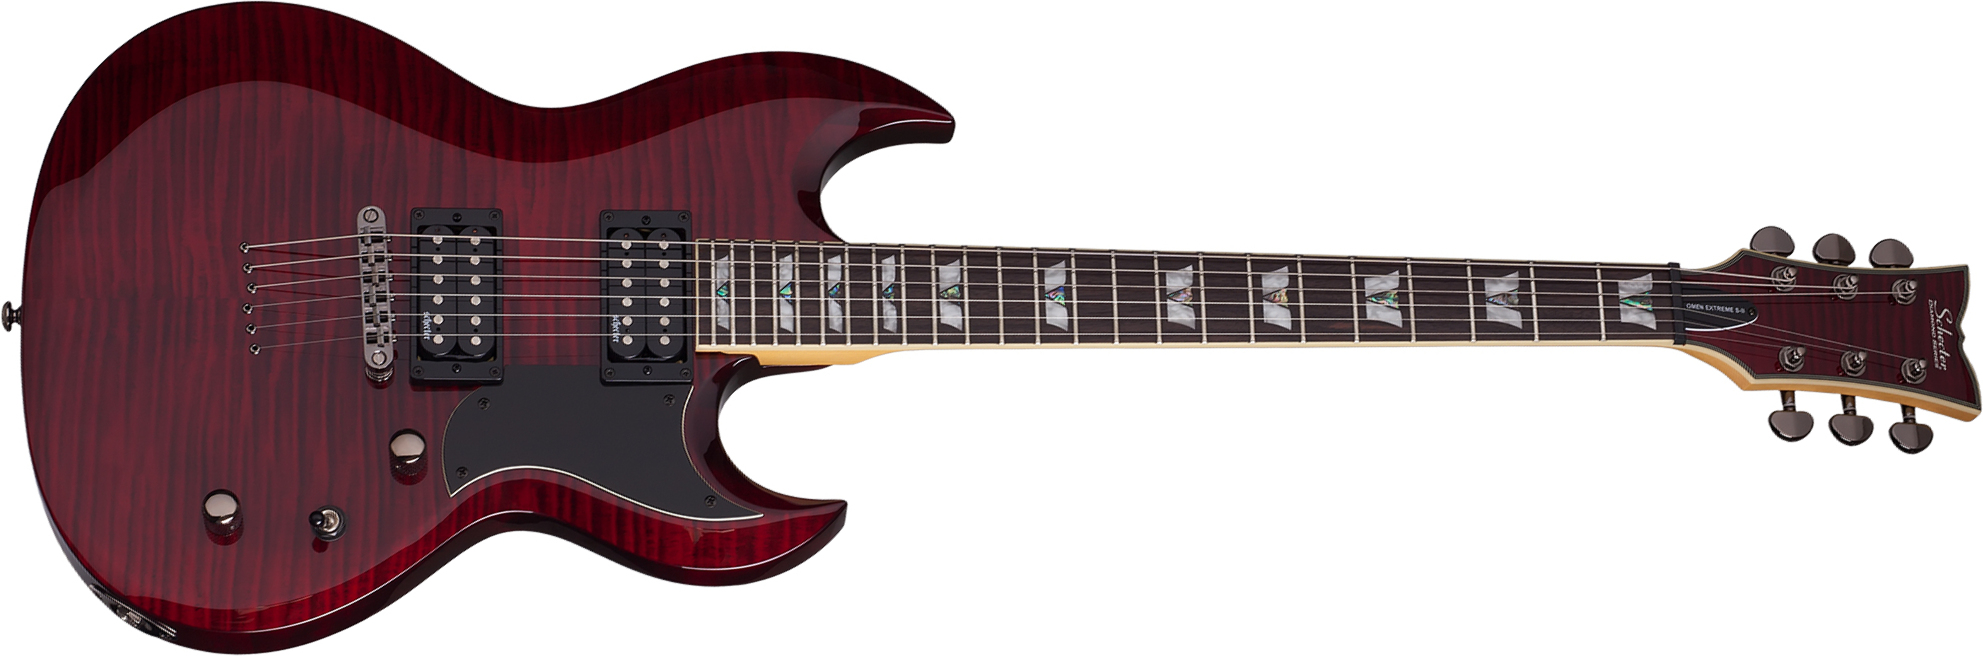 Schecter S-ii Omen Extreme 2h Ht Rw - Black Cherry - Metal electric guitar - Main picture